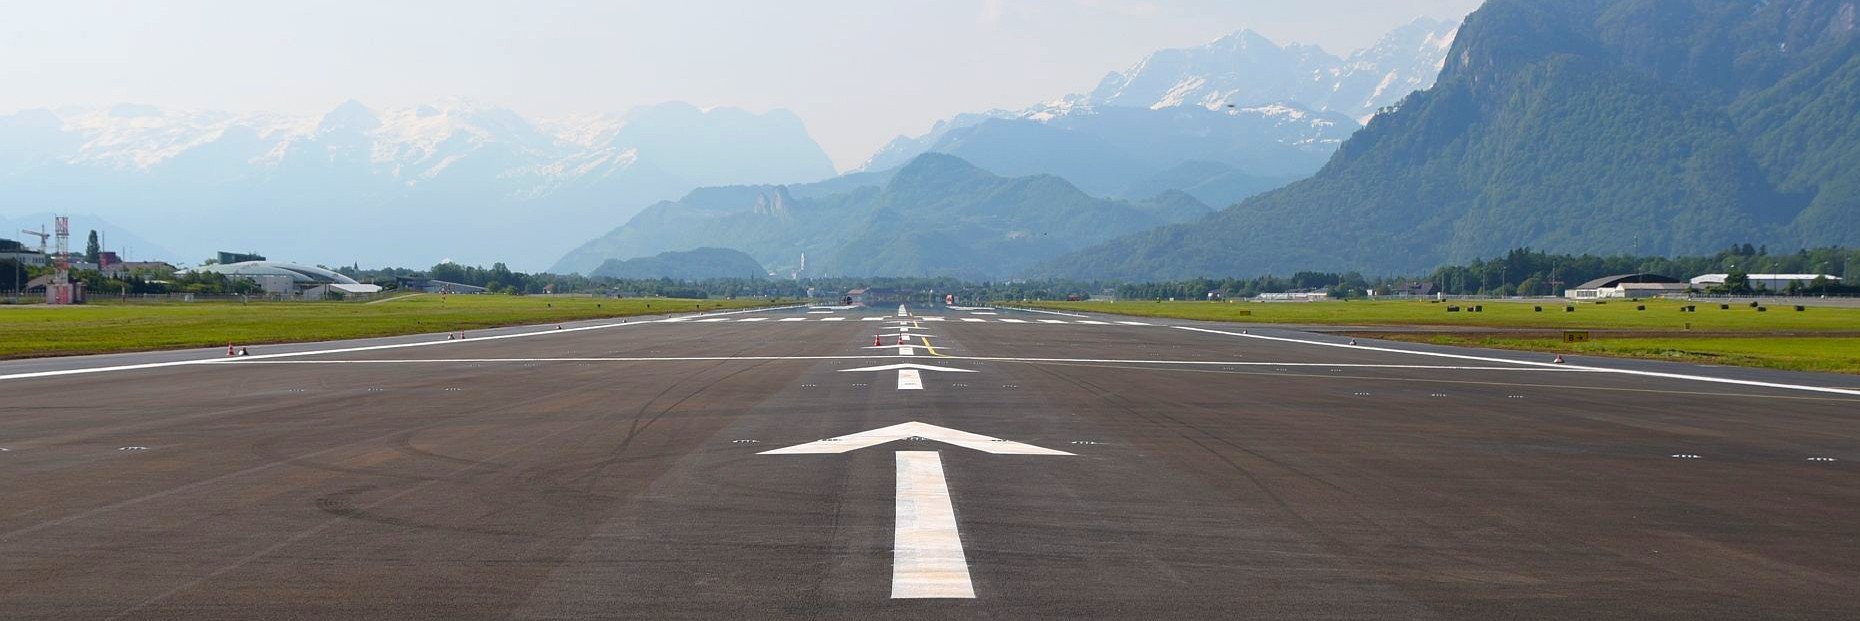 airport runway with high mountains in front